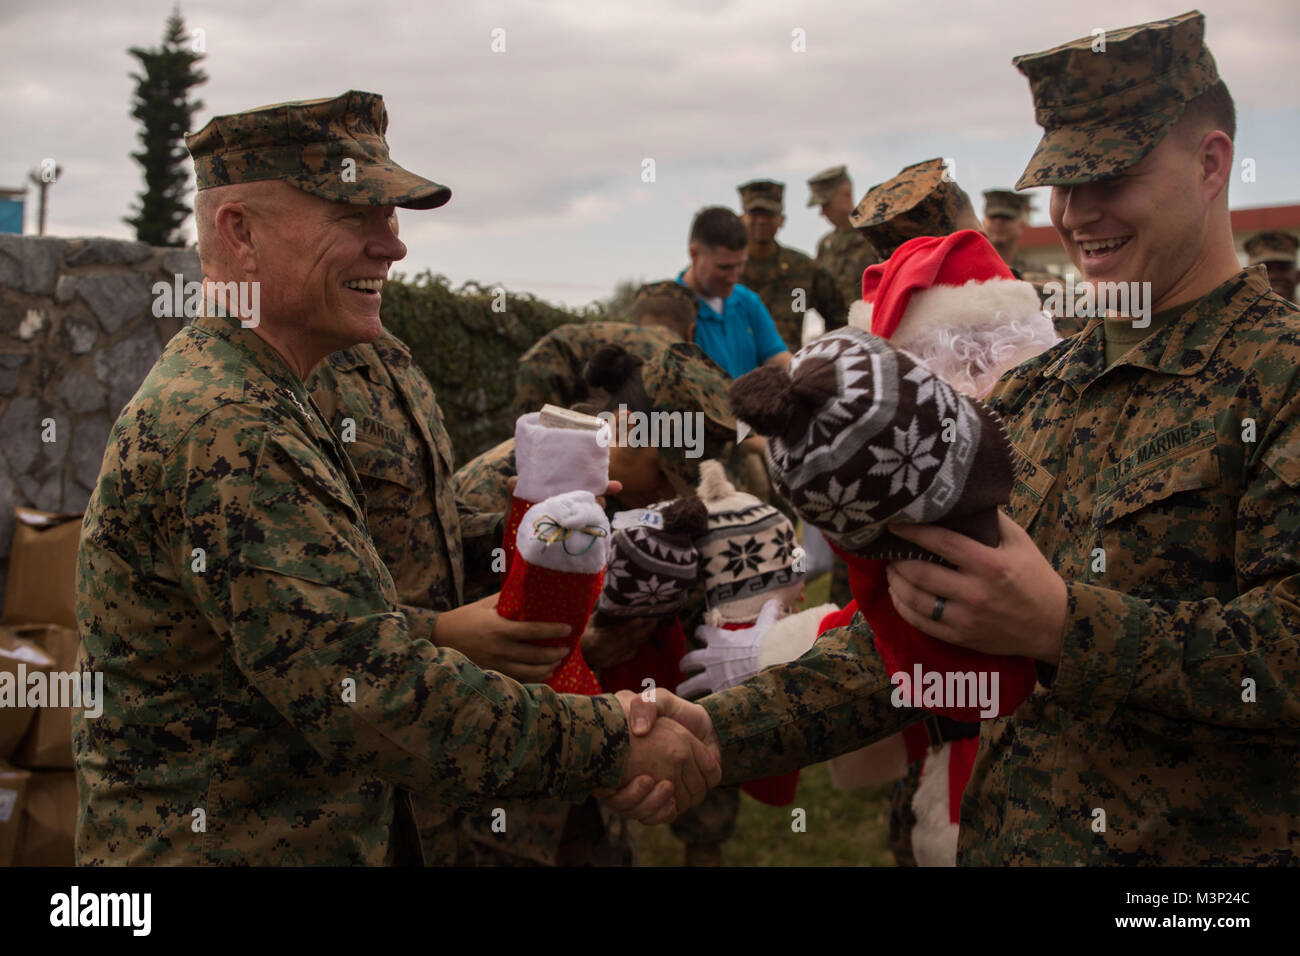 Lt. Gen. Lawrence D. Nicholson, the commanding general of III Marine Expeditionary Force, hands out Christmas stockings to Marines at Camp Courtney, Okinawa, Japan, Dec. 22, 2017.  Nicholson, alongside Santa Claus, wished the Marines happy holidays and provided gifts from volunteer organizations to the III MEF command element to spread Christmas cheer. (U.S. Marine Corps photo by Cpl. Nelson Duenas/released) III MEF General Spreads Christmas Cheer to his Marines in Okinawa, Japan by #PACOM Stock Photo